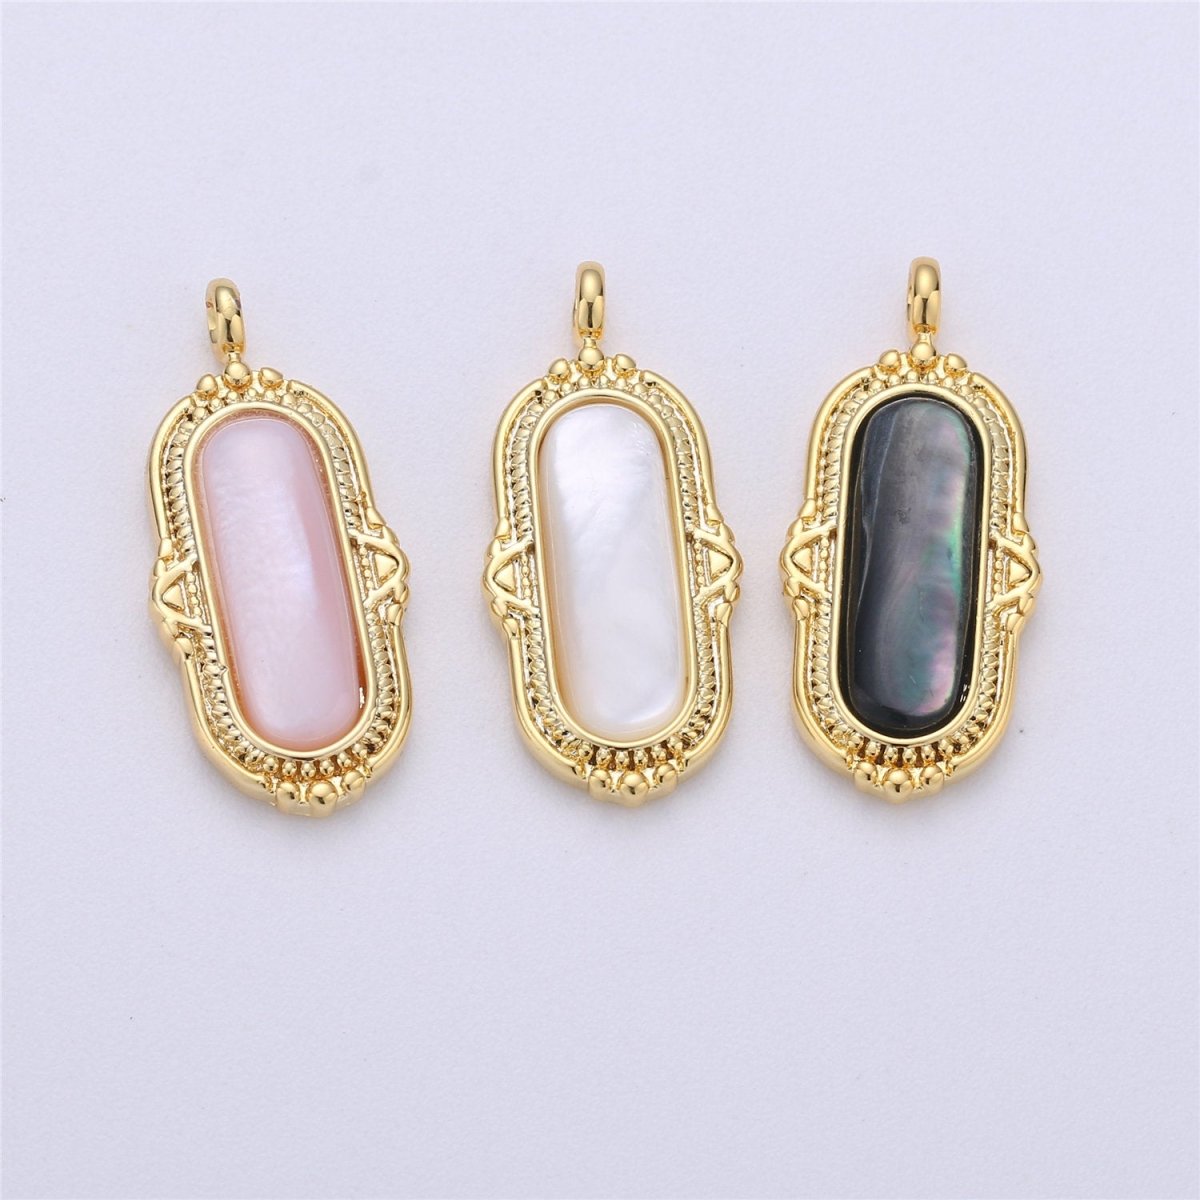 25x12mm Oval Charm, mother of pearl in 24k Gold Filled for Necklace Earring Component Pink White Black Pearl Charm, D-805, D-806 - DLUXCA